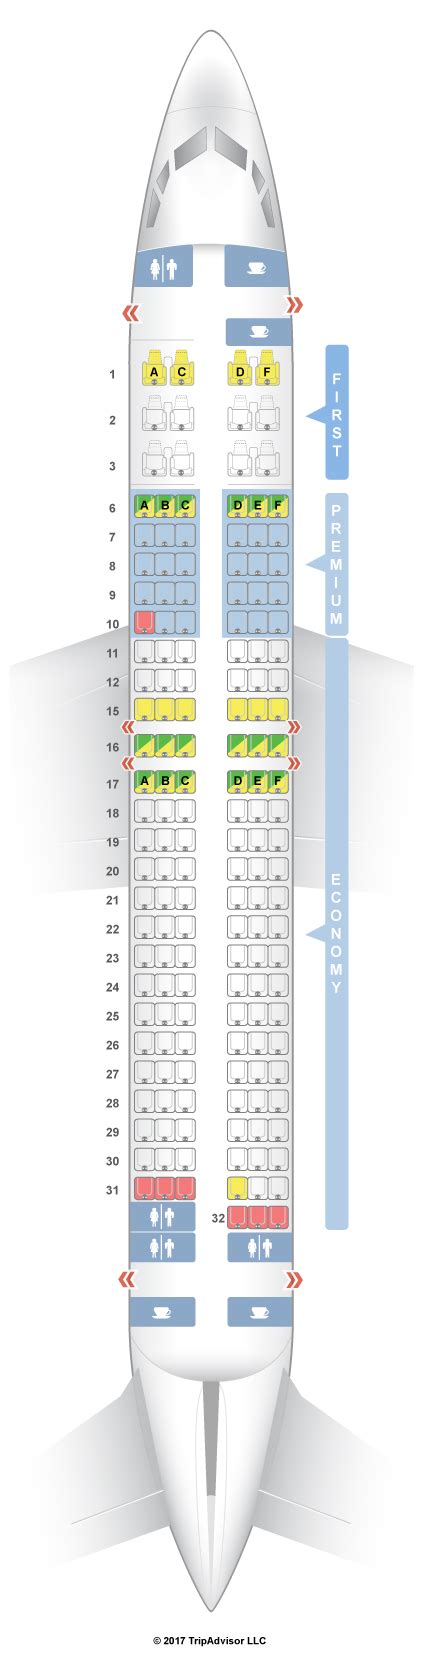 At present, guests are unable to select a seat during the booking process on flightpass.alaskaair.com. However, this can be done afterwards on alaskaair.com. Once the booking is created and a confirmation code has been generated, visit alaskaair.com, select ‘Manage Trip,’ and enter the confirmation code and last name of the traveler.. 